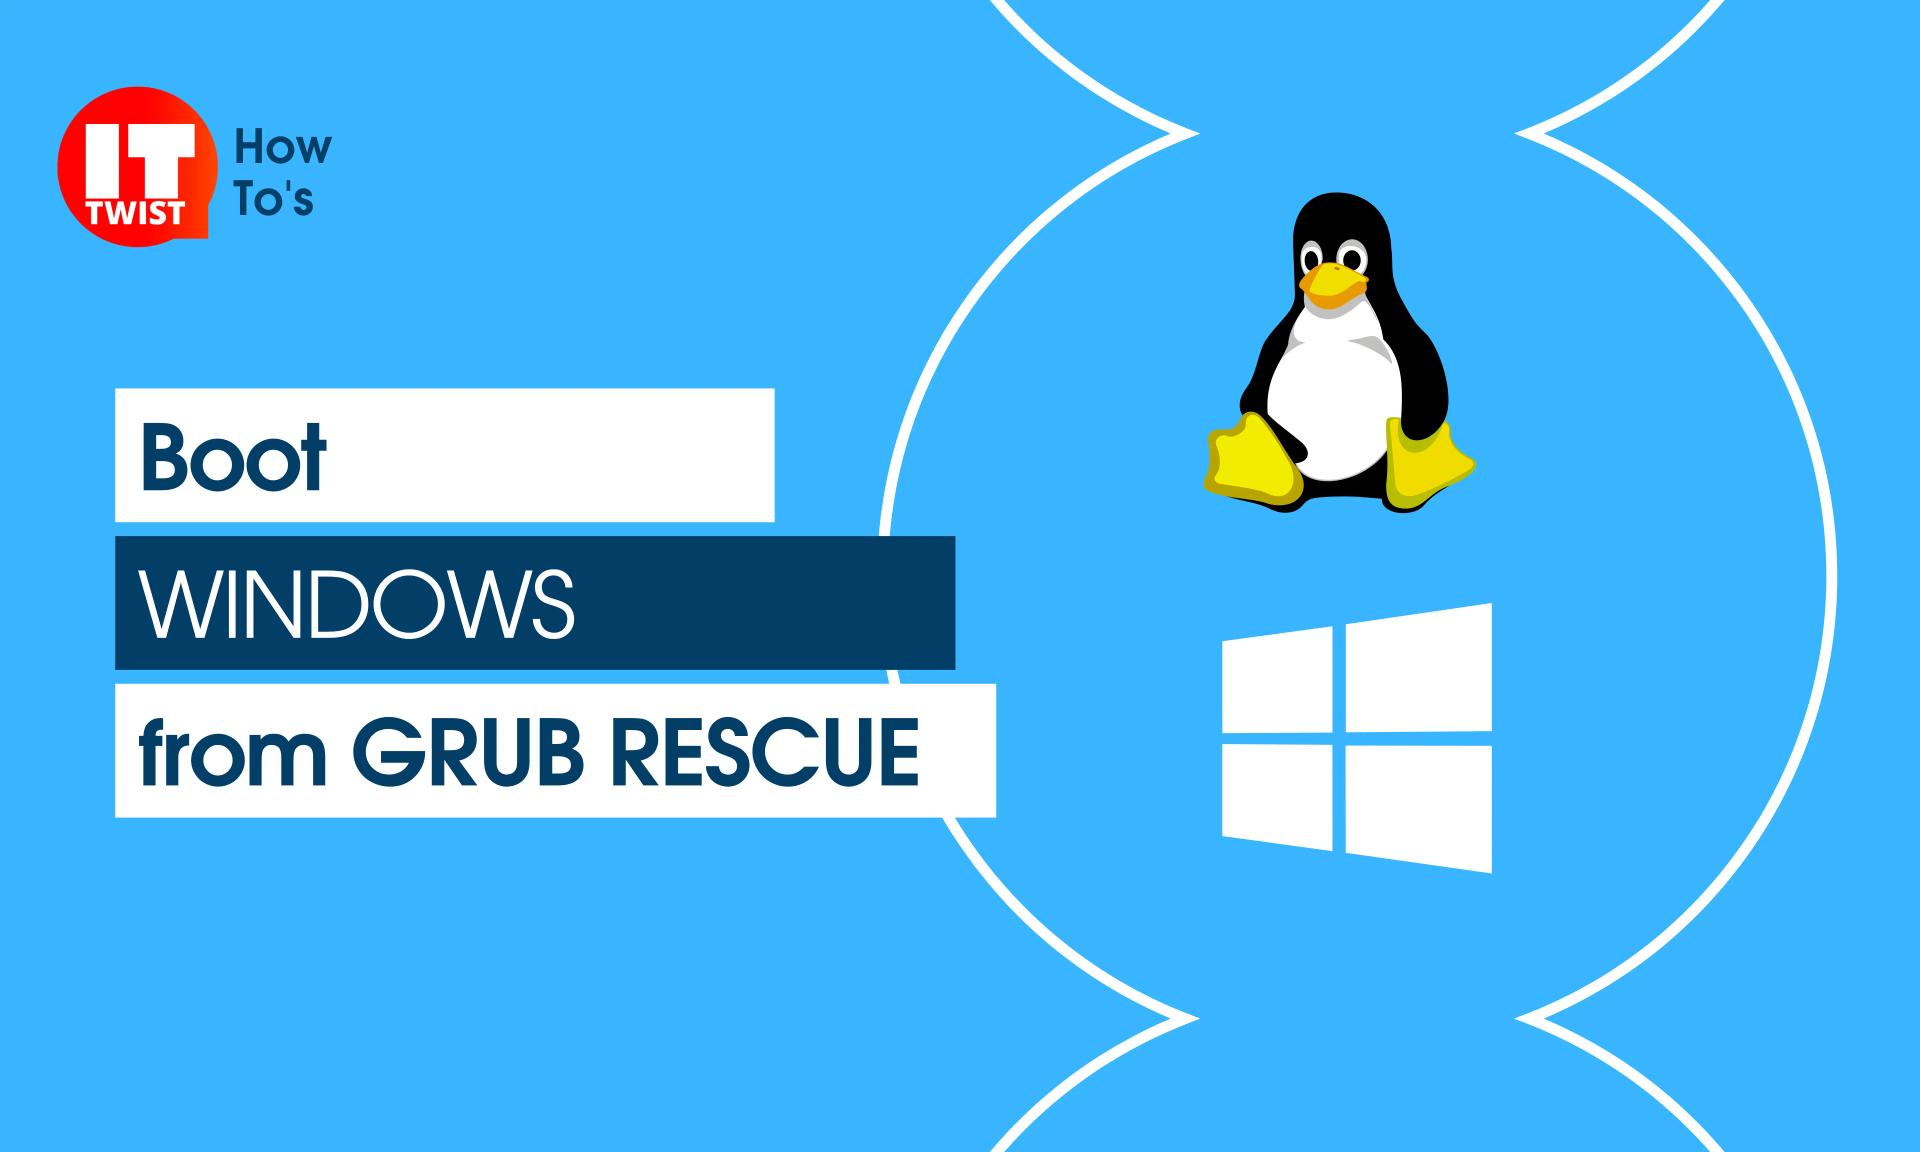 How to boot windows from grub rescue?